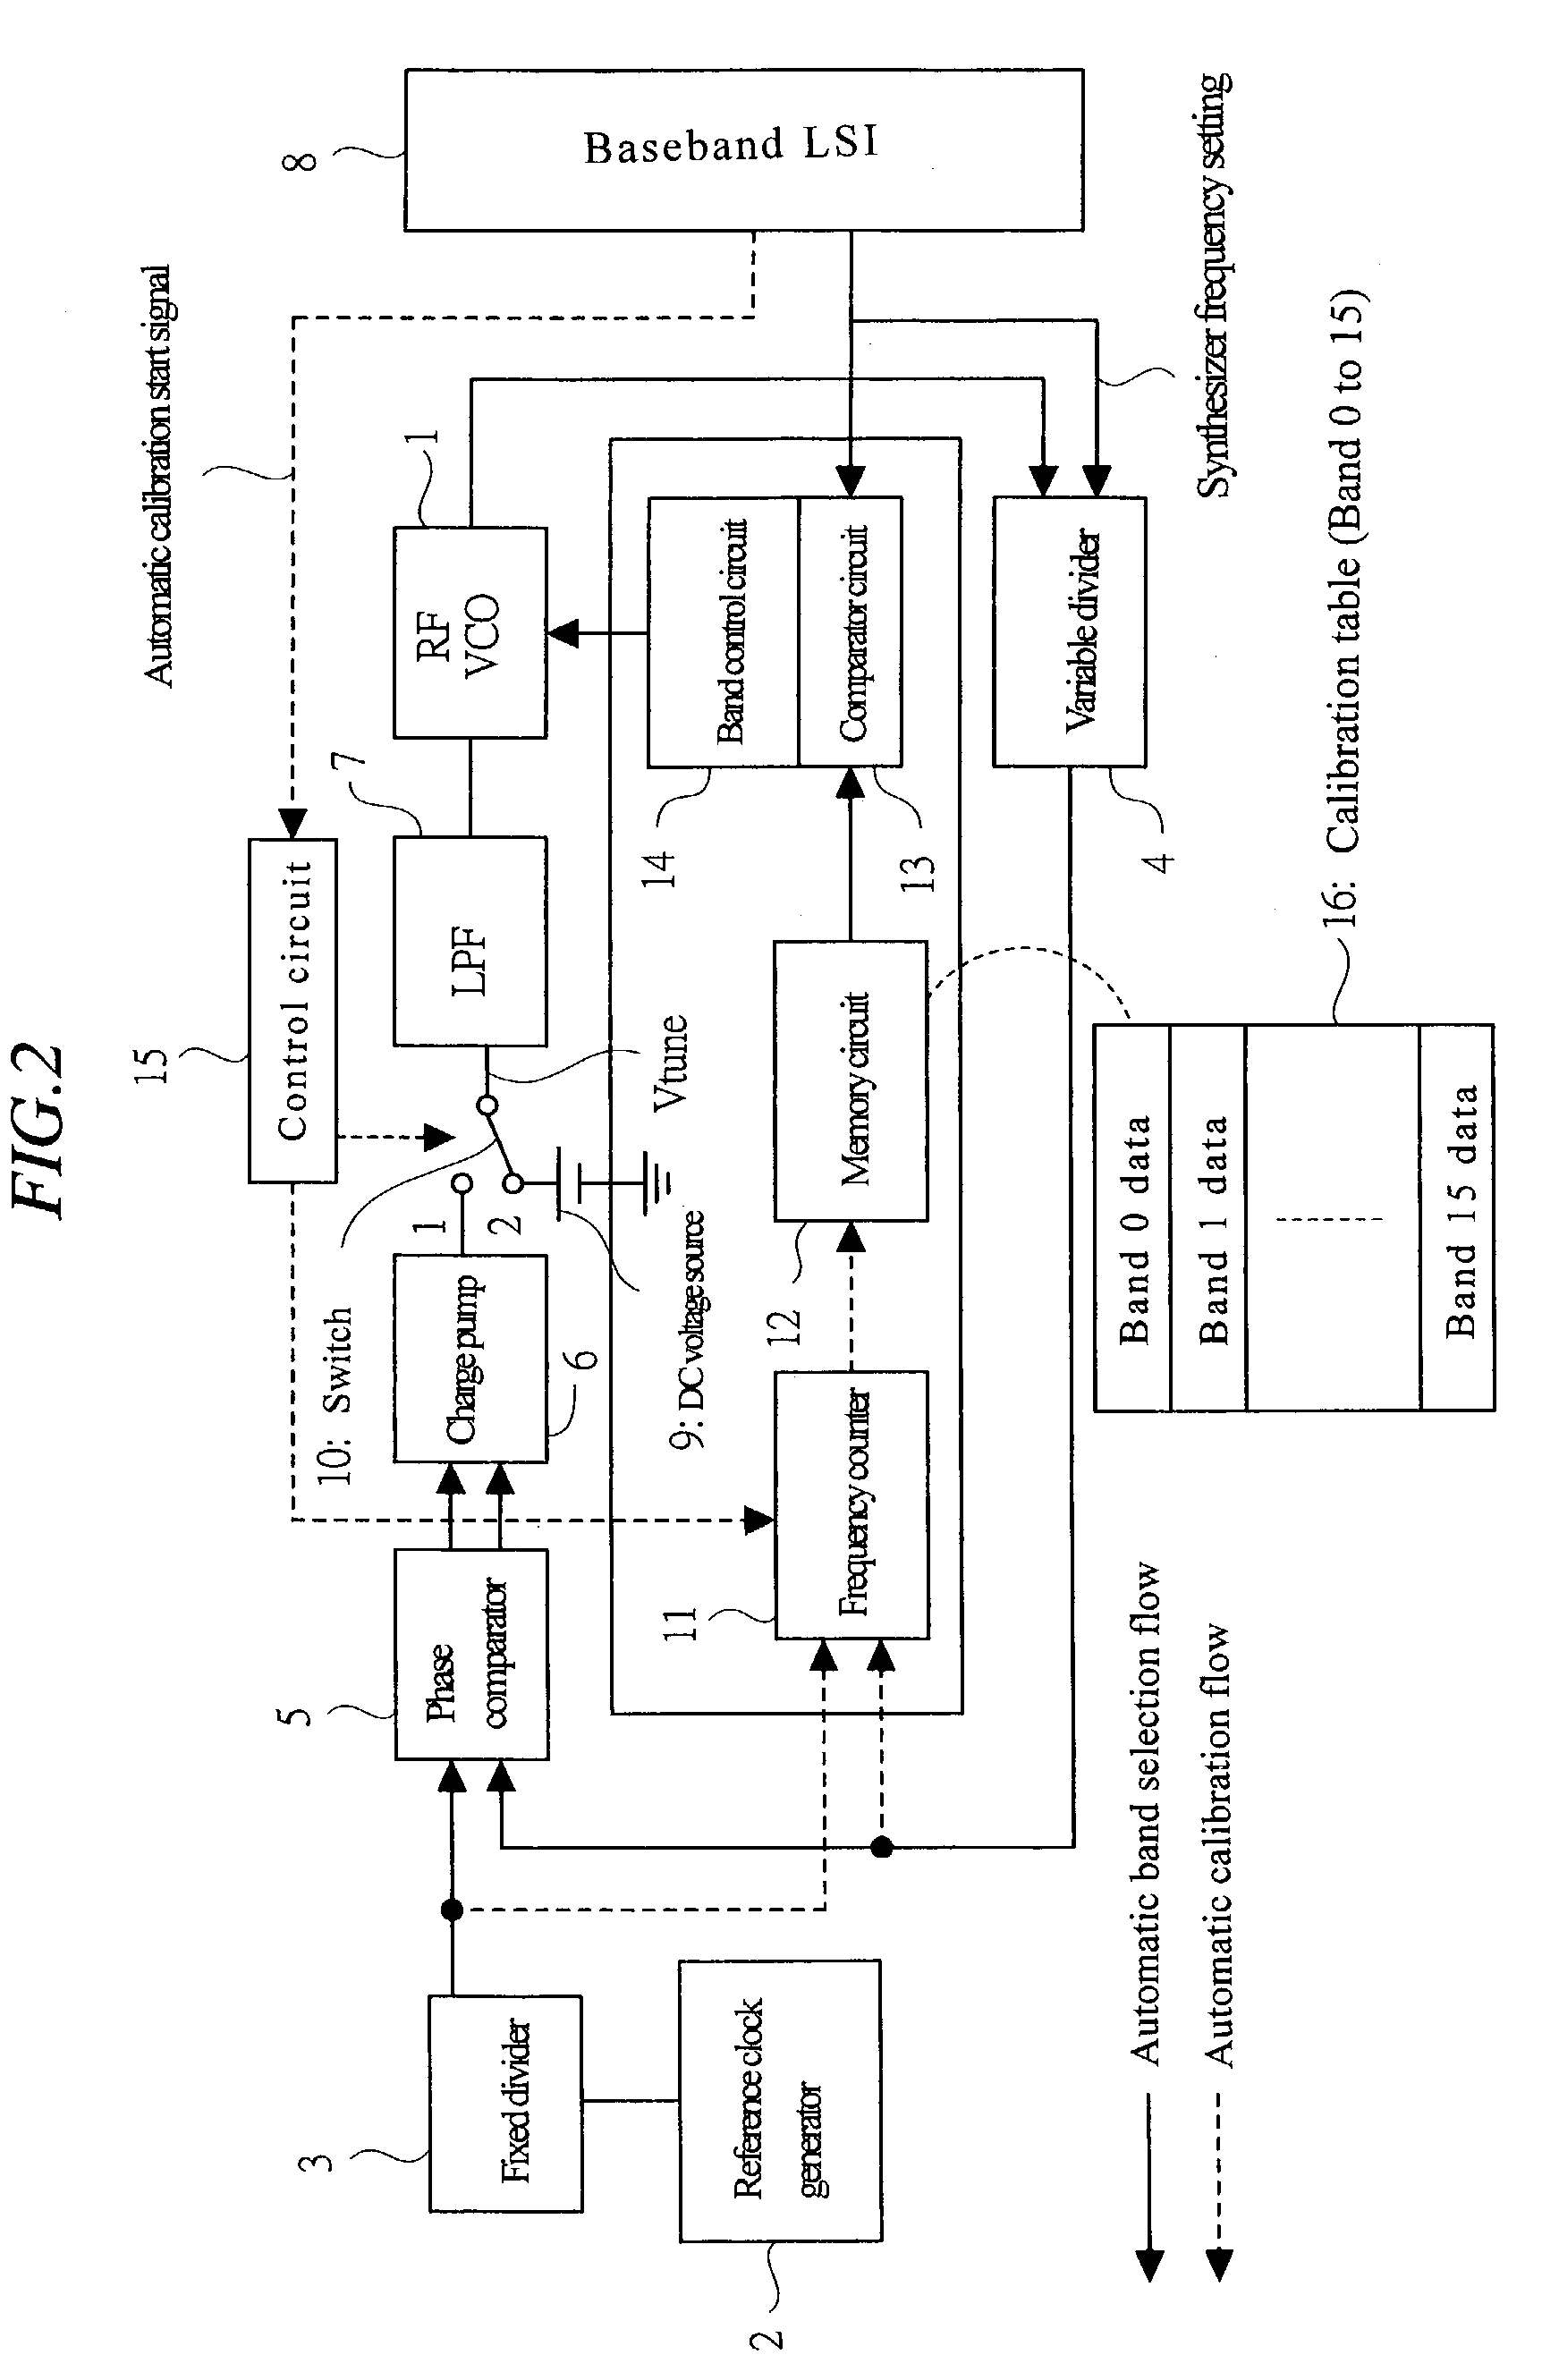 PLL circuit having a multi-band oscillator and compensating oscillation frequency